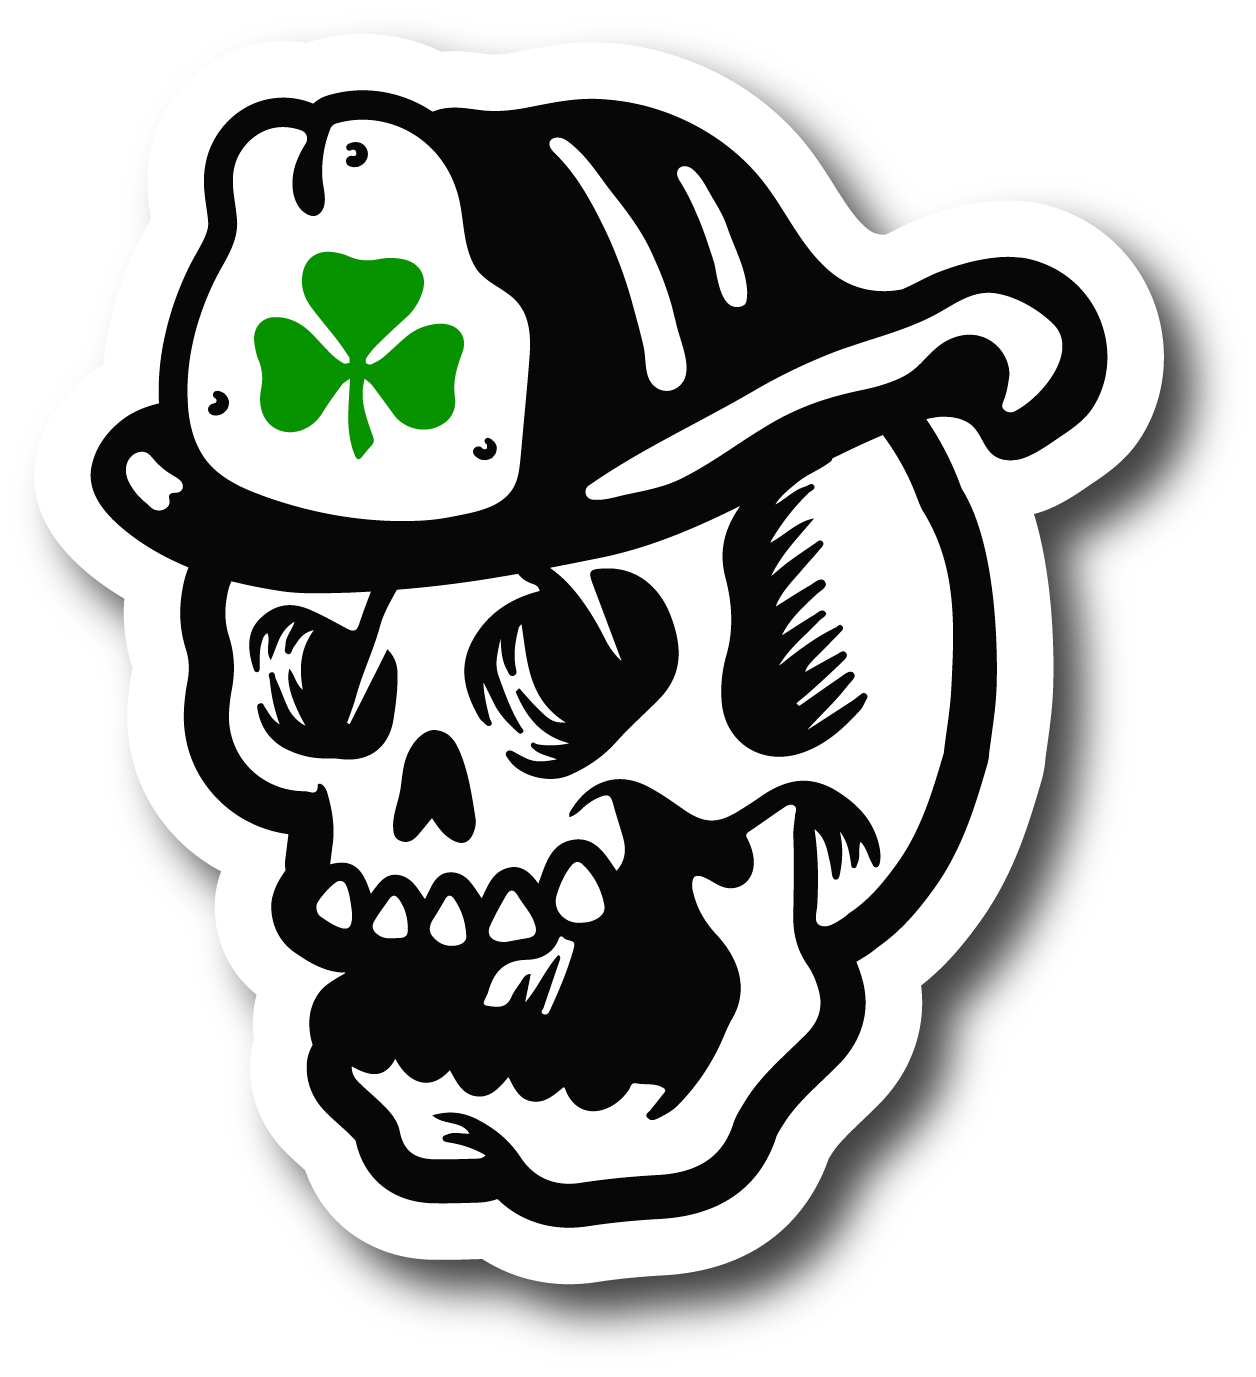 H.C. Clover Decal